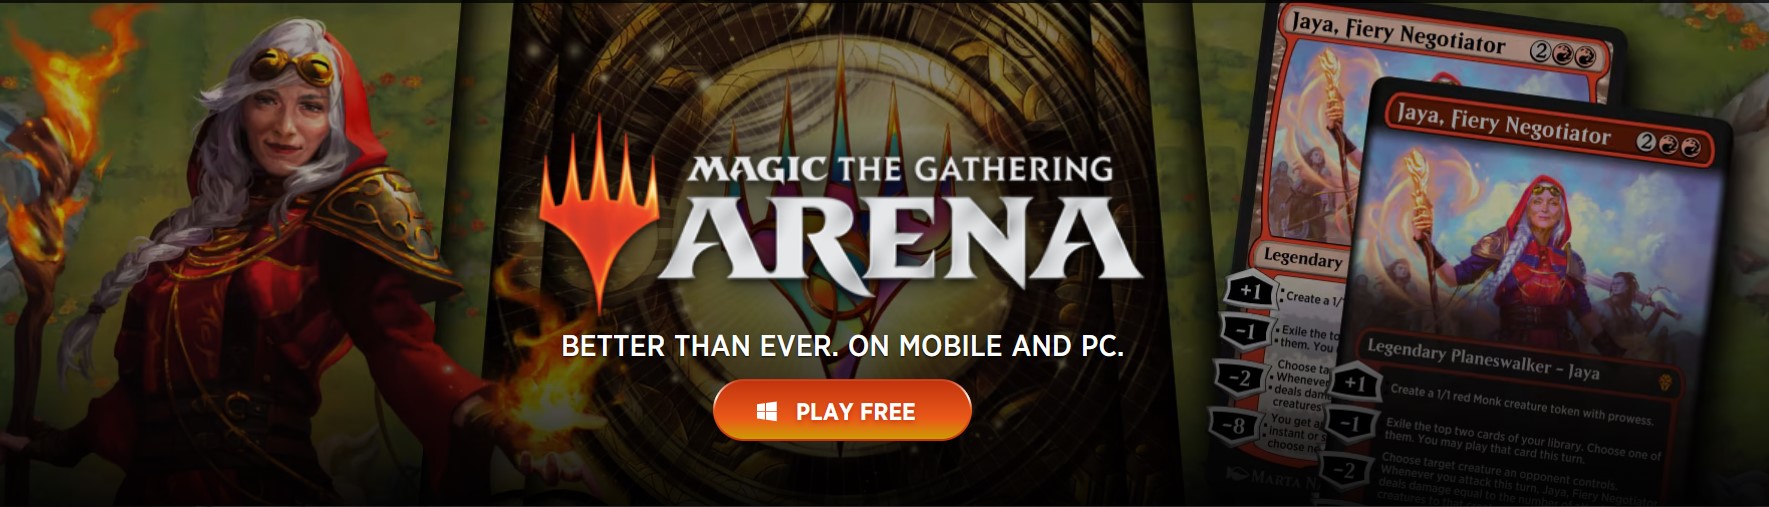 Magic: The Gathering Arena free to play